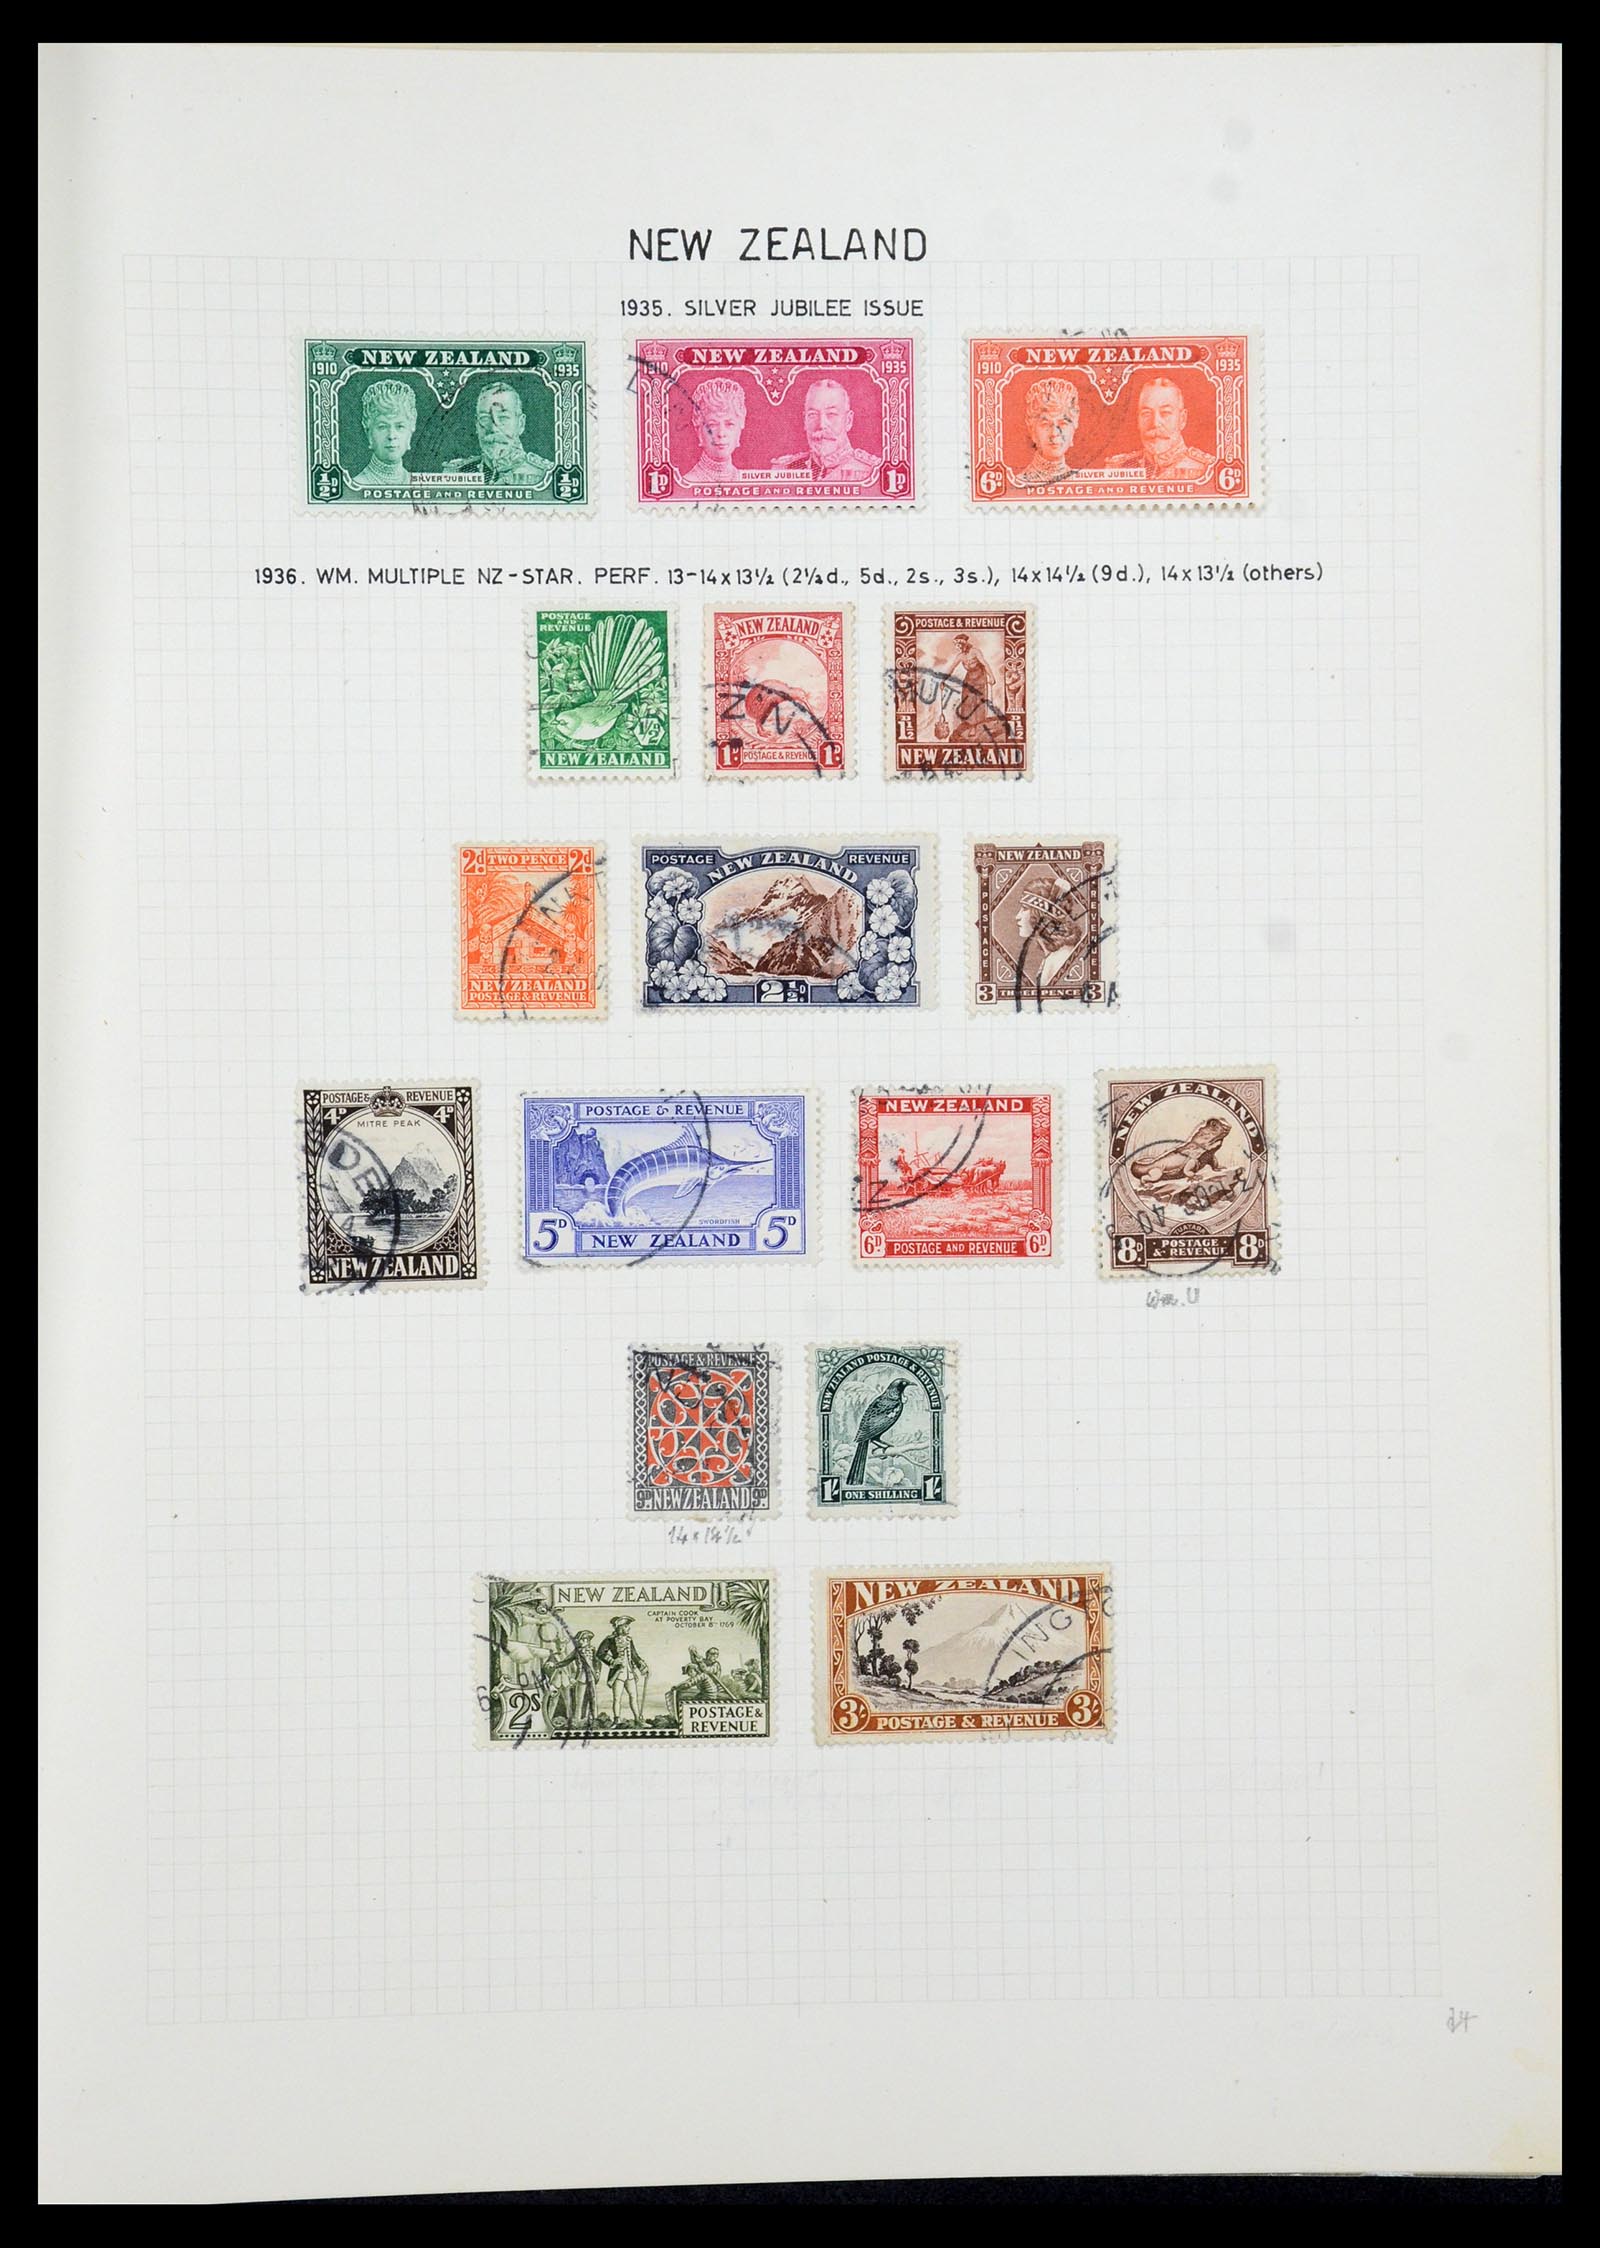 35500 024 - Stamp Collection 35500 British Commonwealth supercollection 1855-1970.